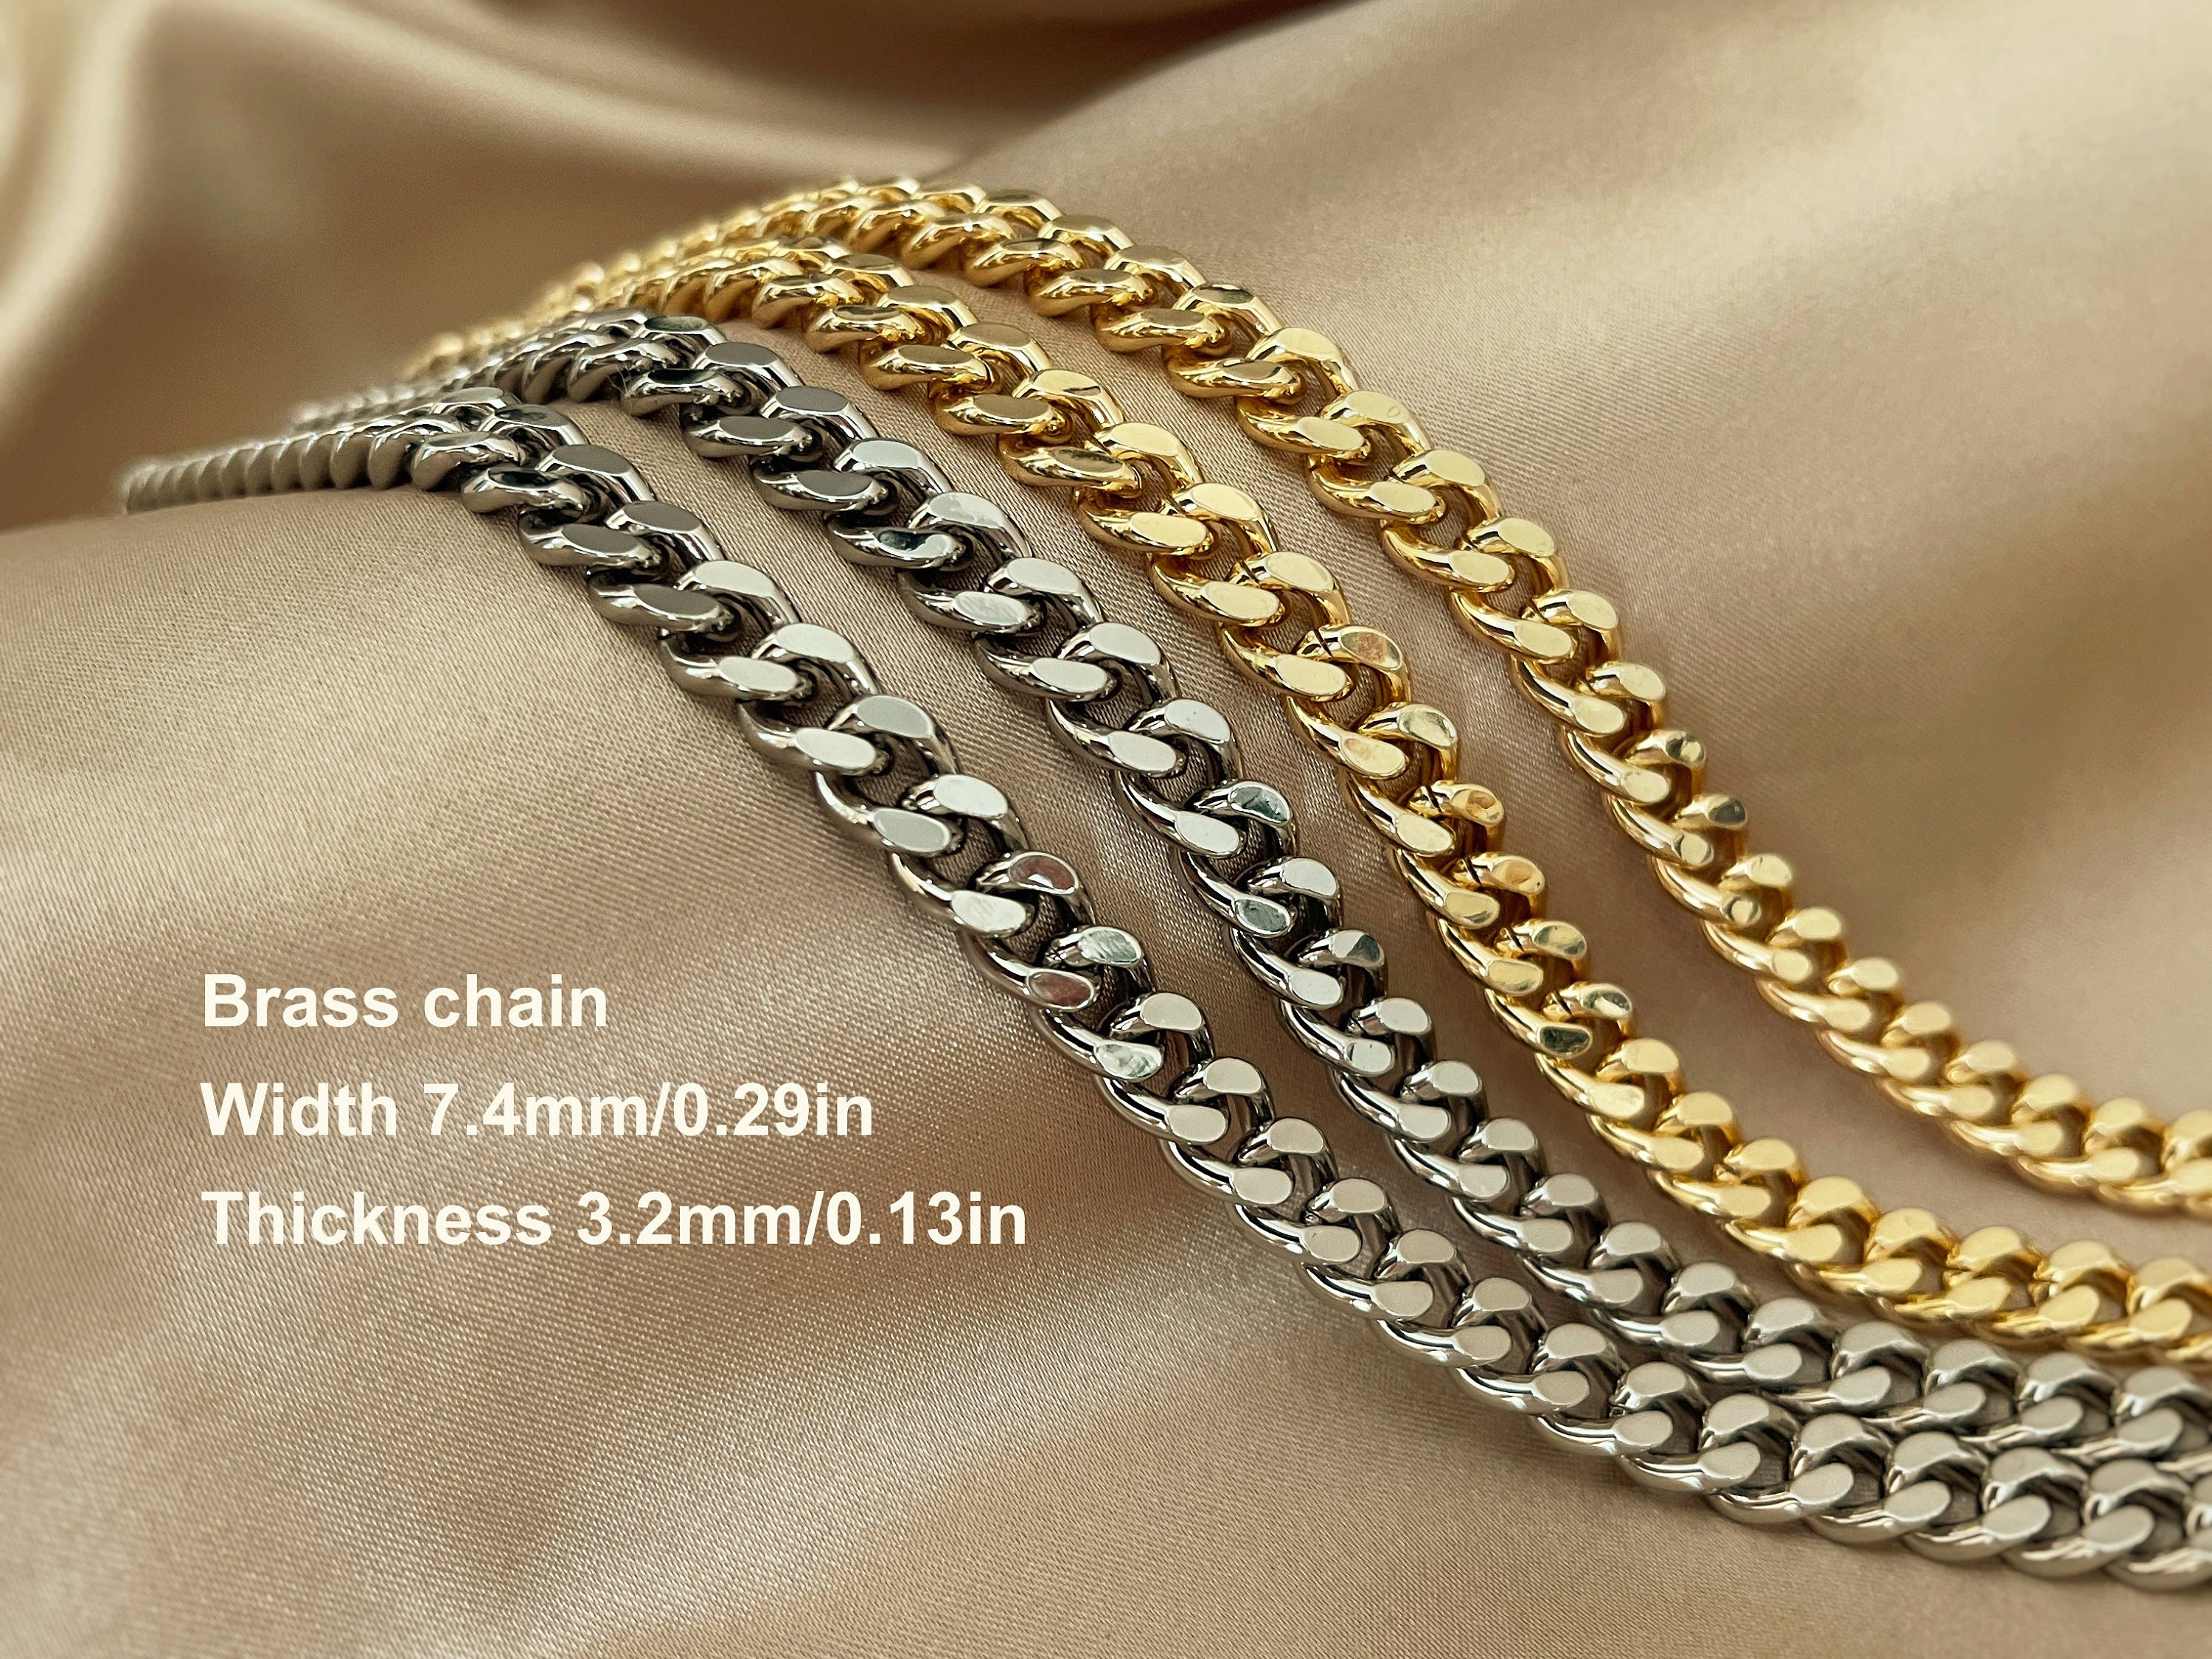 Brass Curb Purse Chain Strap With Clasps, 7.4mm Gold Plated Wallet Chain  Bag Chain, Handbag Charm Accessories -  Ireland